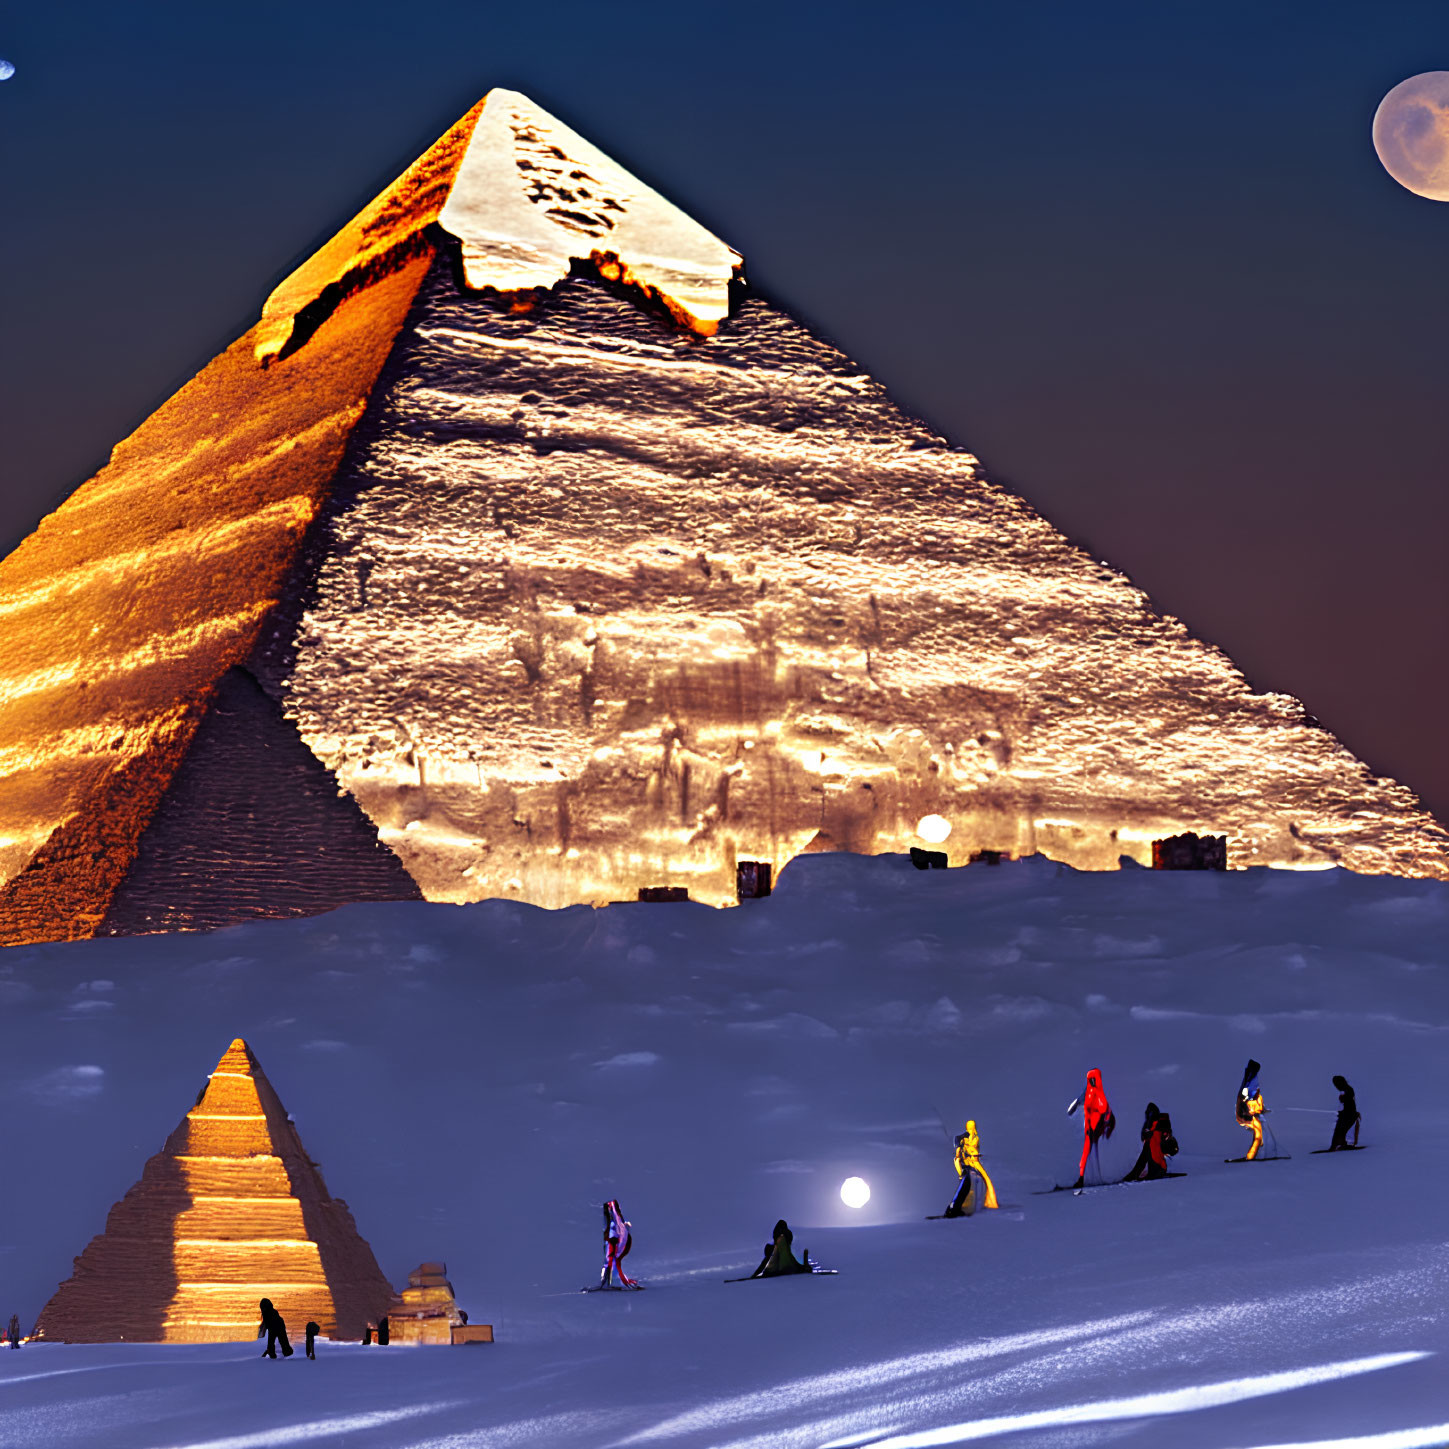 Composite image of Great Pyramid of Giza in snowy landscape with night trekkers